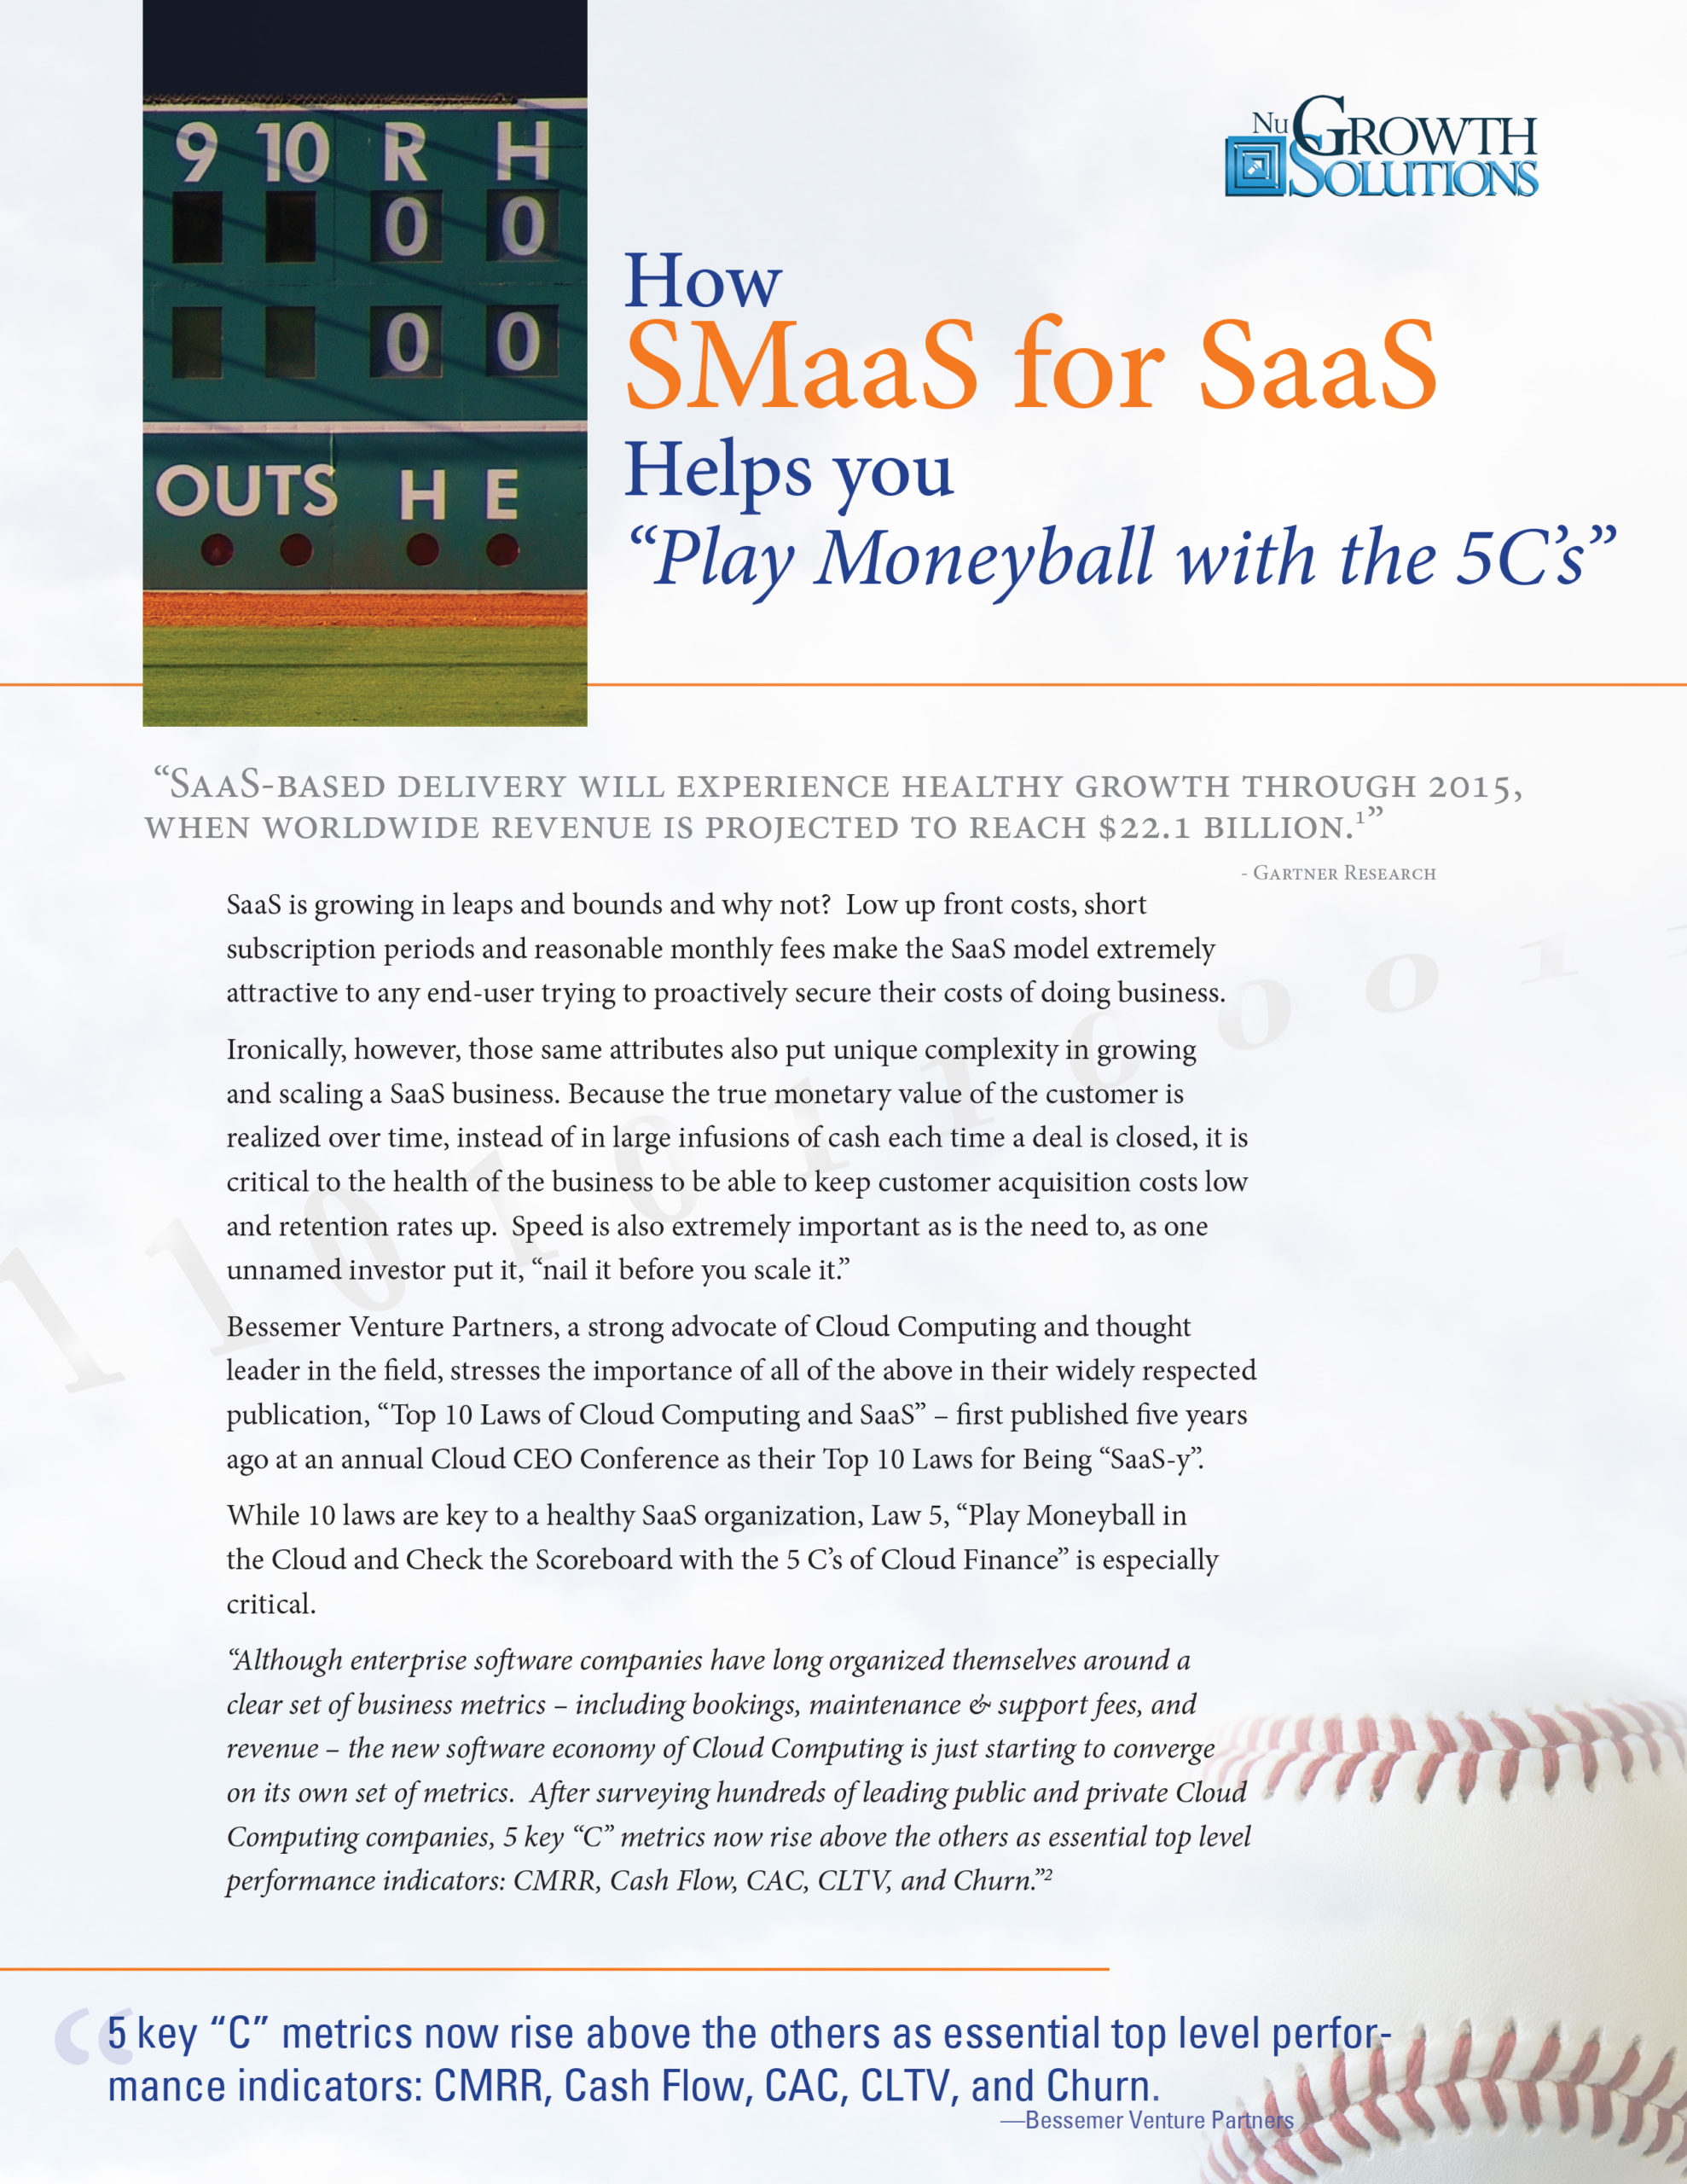 How-SMaaS-for-SaaS-Helps-You-“Play-Moneyball-with-the-5-C’s”-1